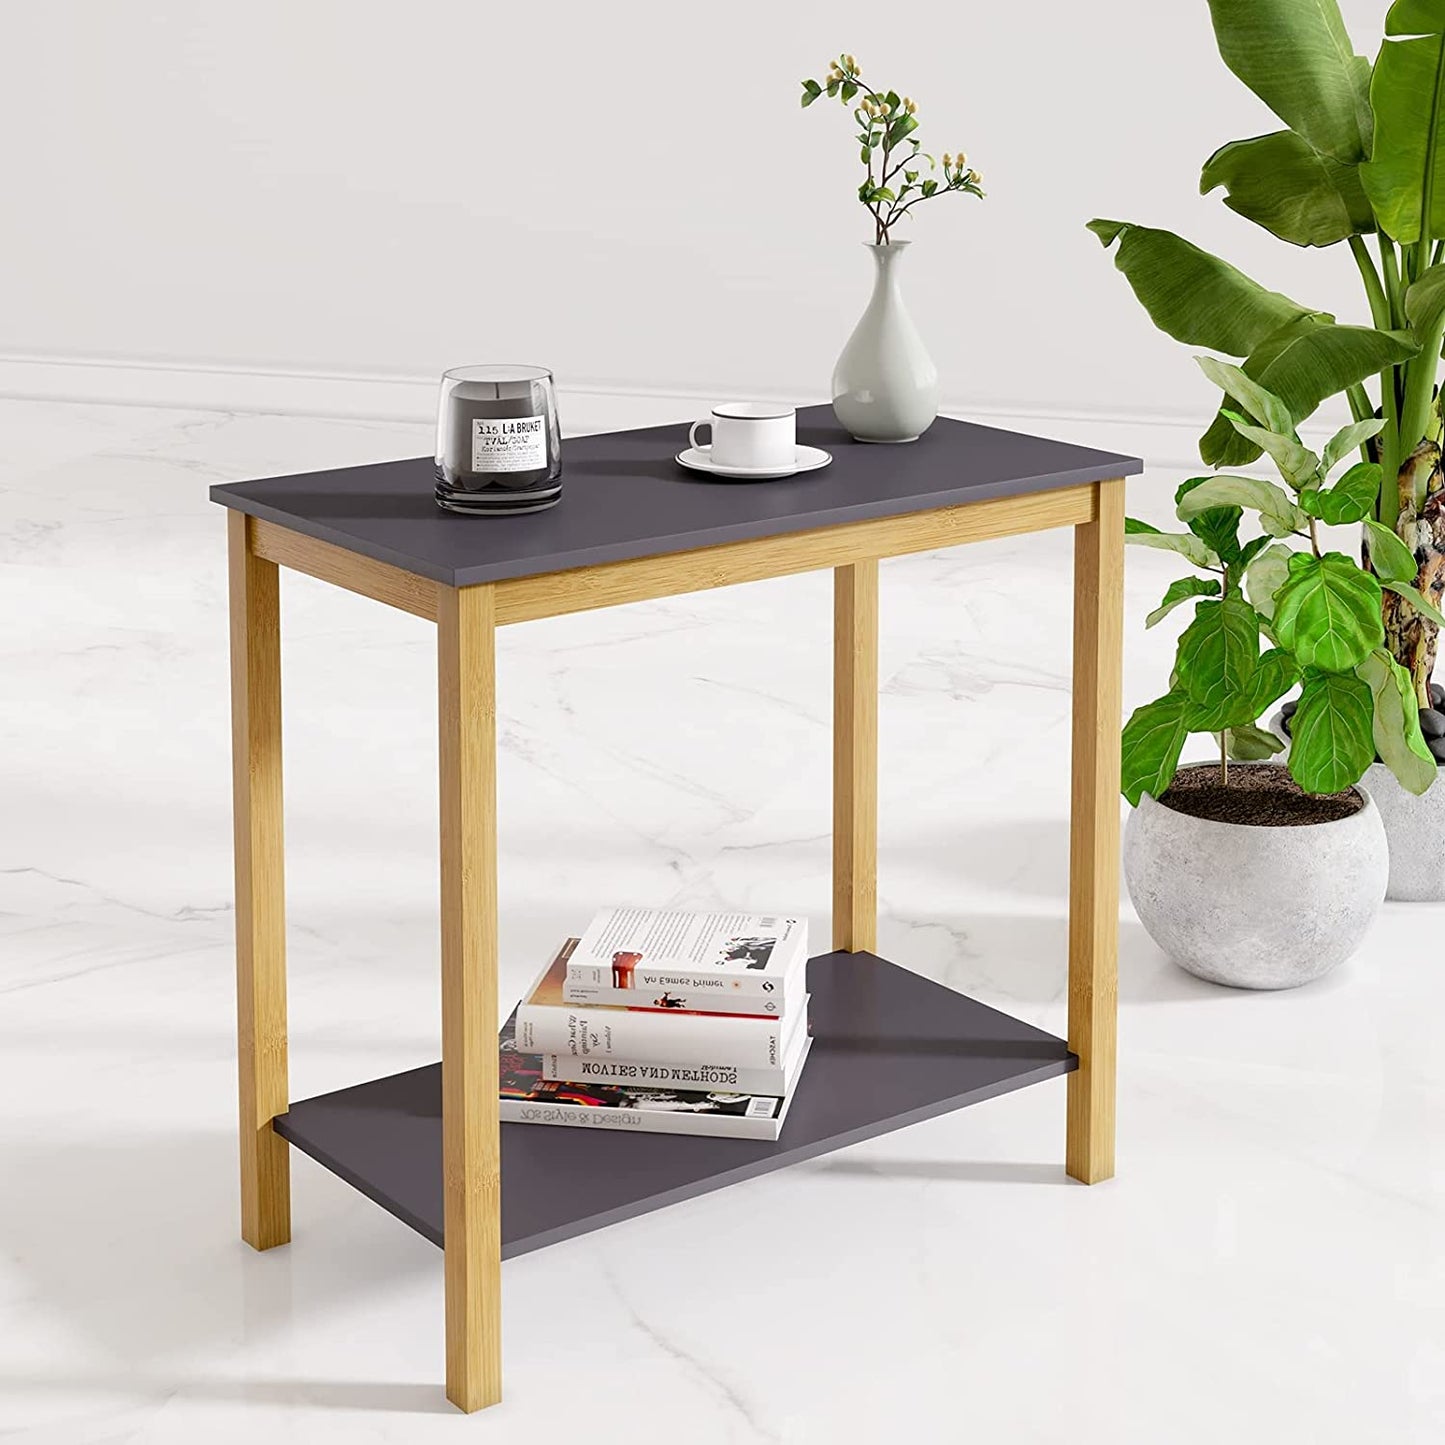 Side Tables Storage Shelf for Living Room Bedroom Balcony Family and Office in Grey Color